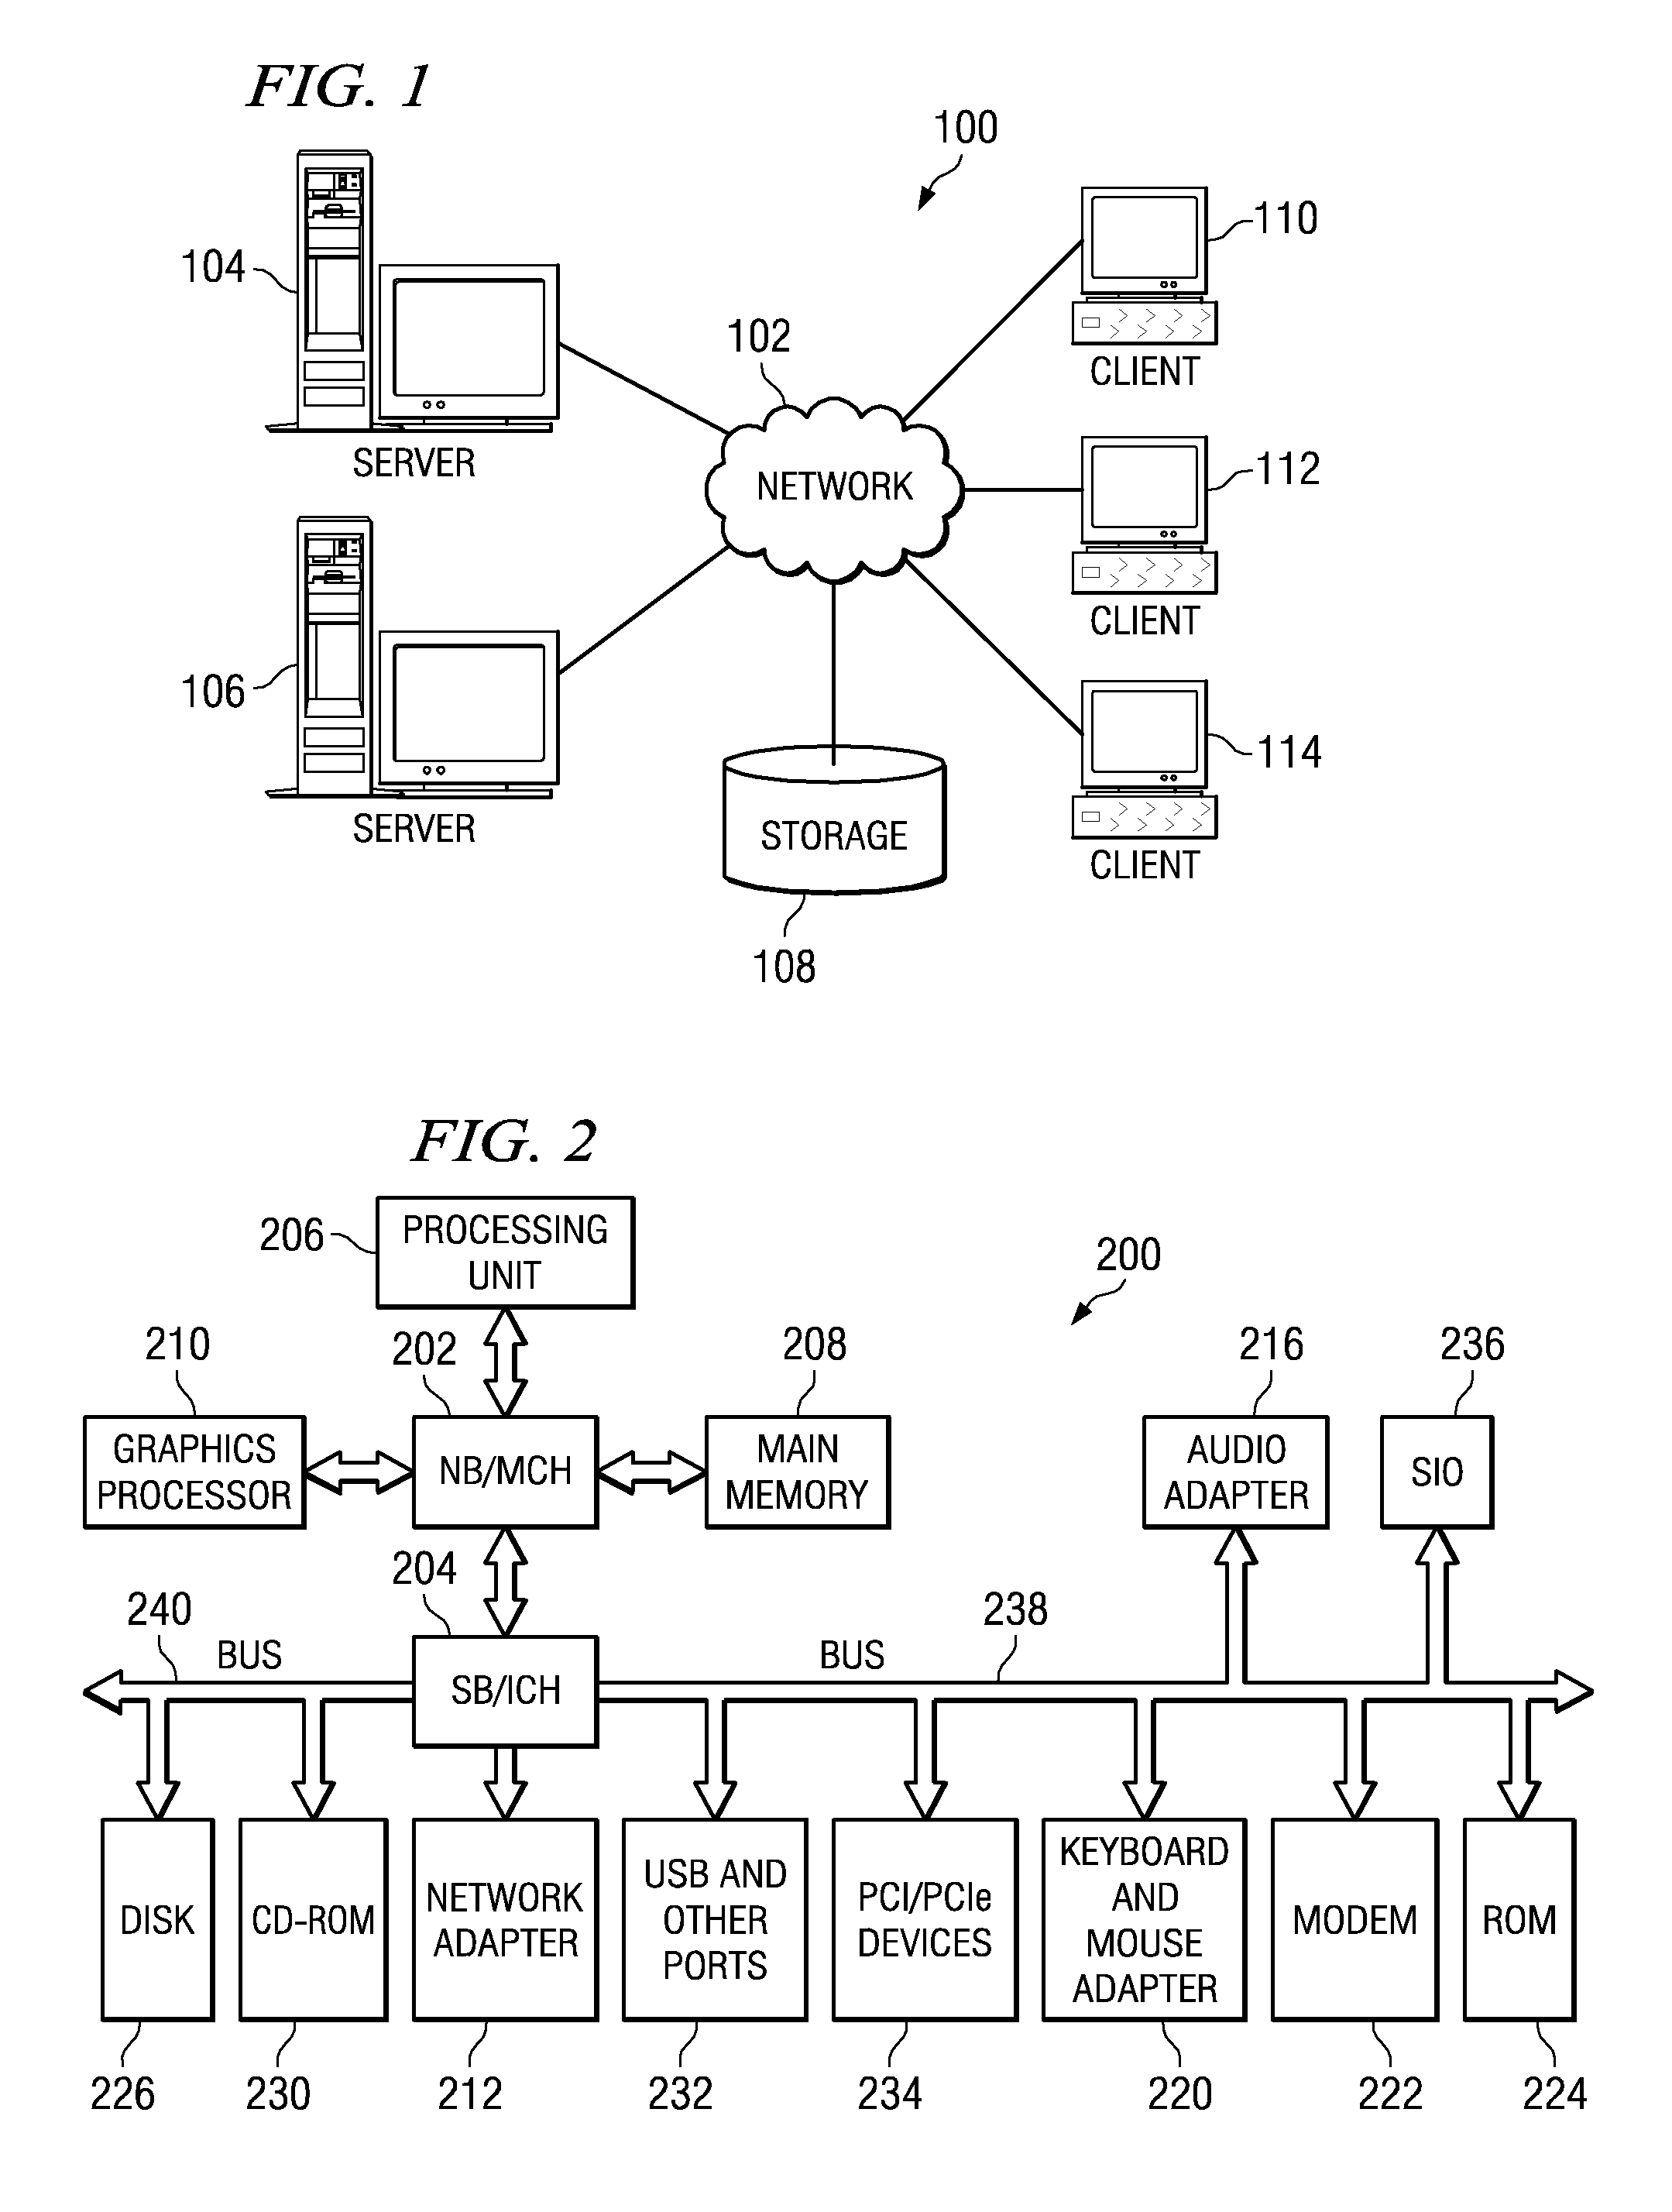 Associative temporal search of electronic files